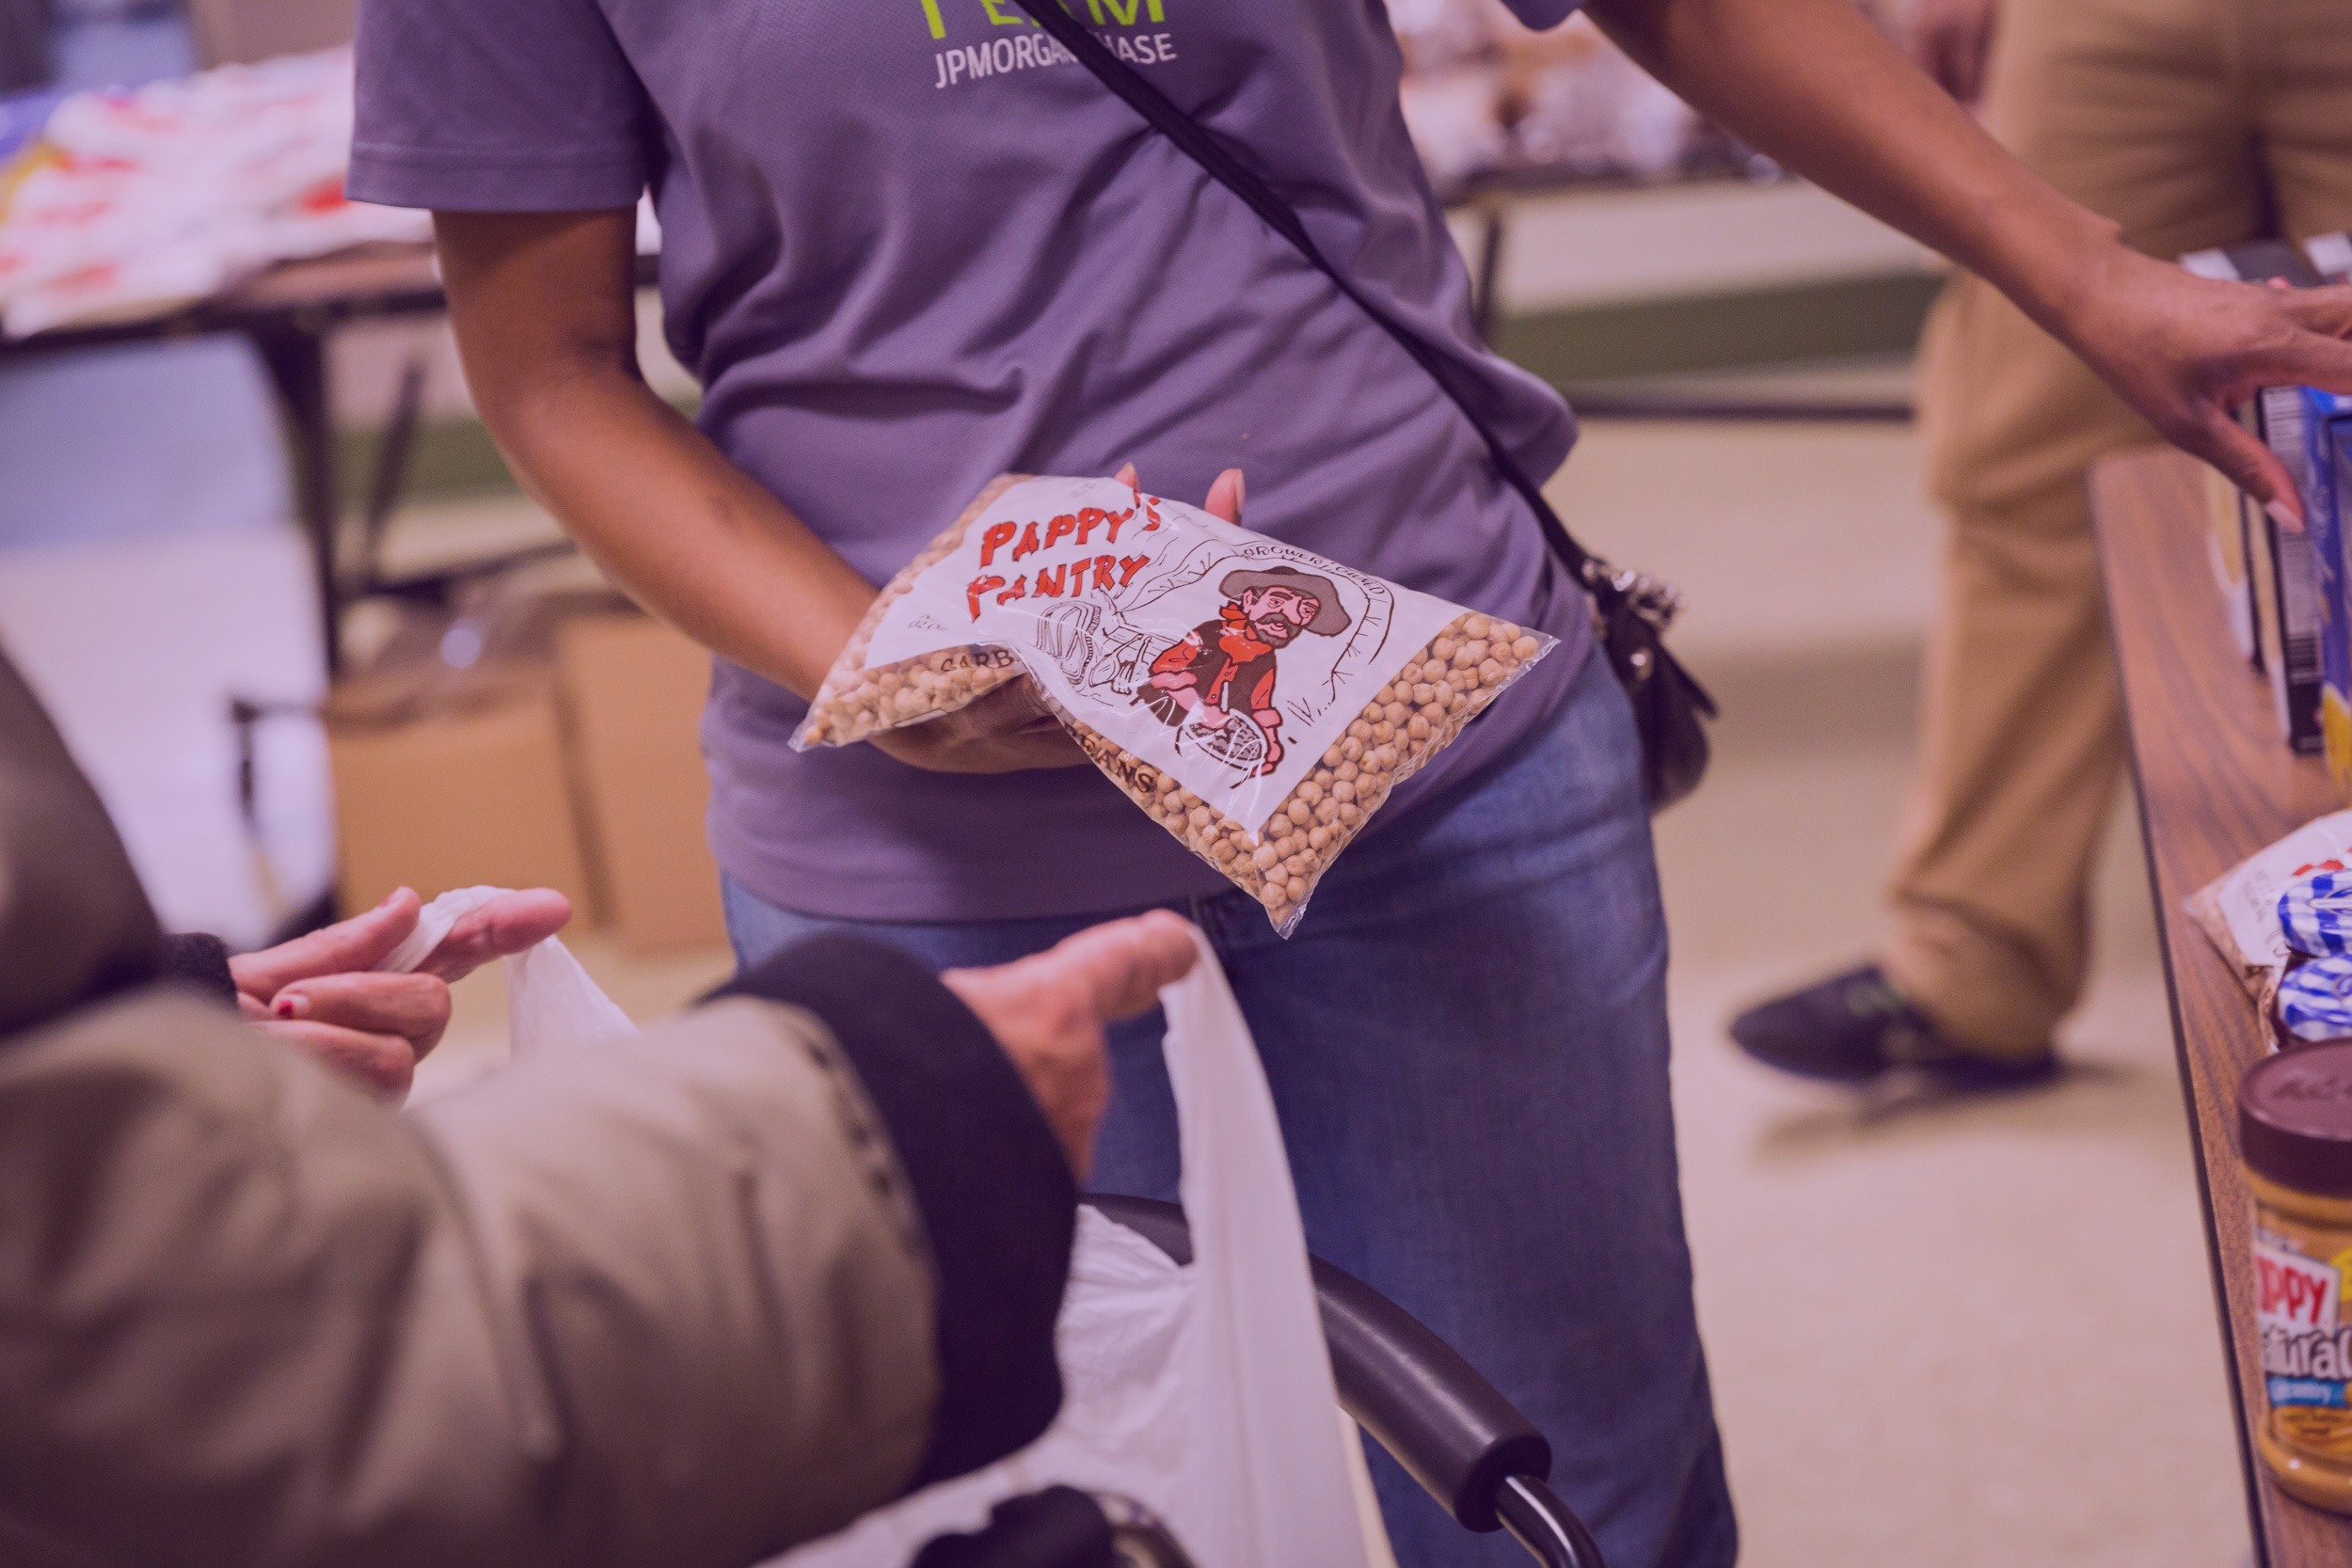 A food pantry volunteer handing out a package of beans